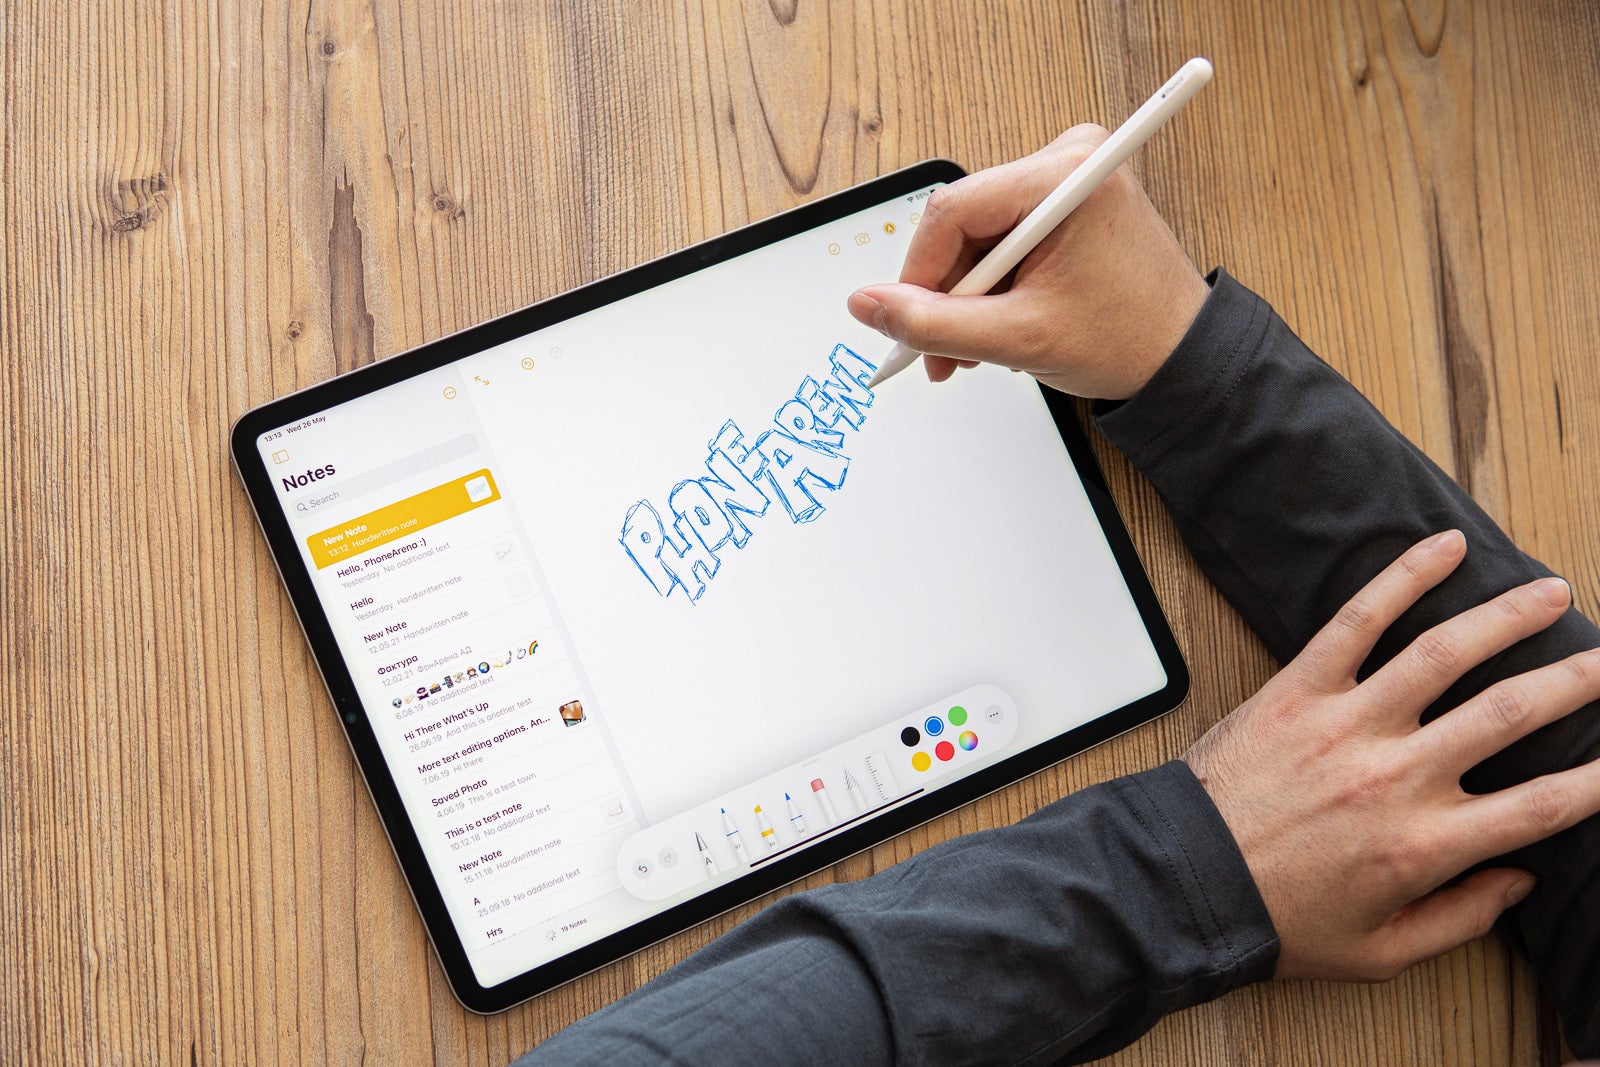 The 12.9-inch mini-LED screen on the 2021 iPad Pro has received backlash about its problems with dimming. - Apple is investing $200 million in mini-LED production as it struggles to meet iPad Pro demand